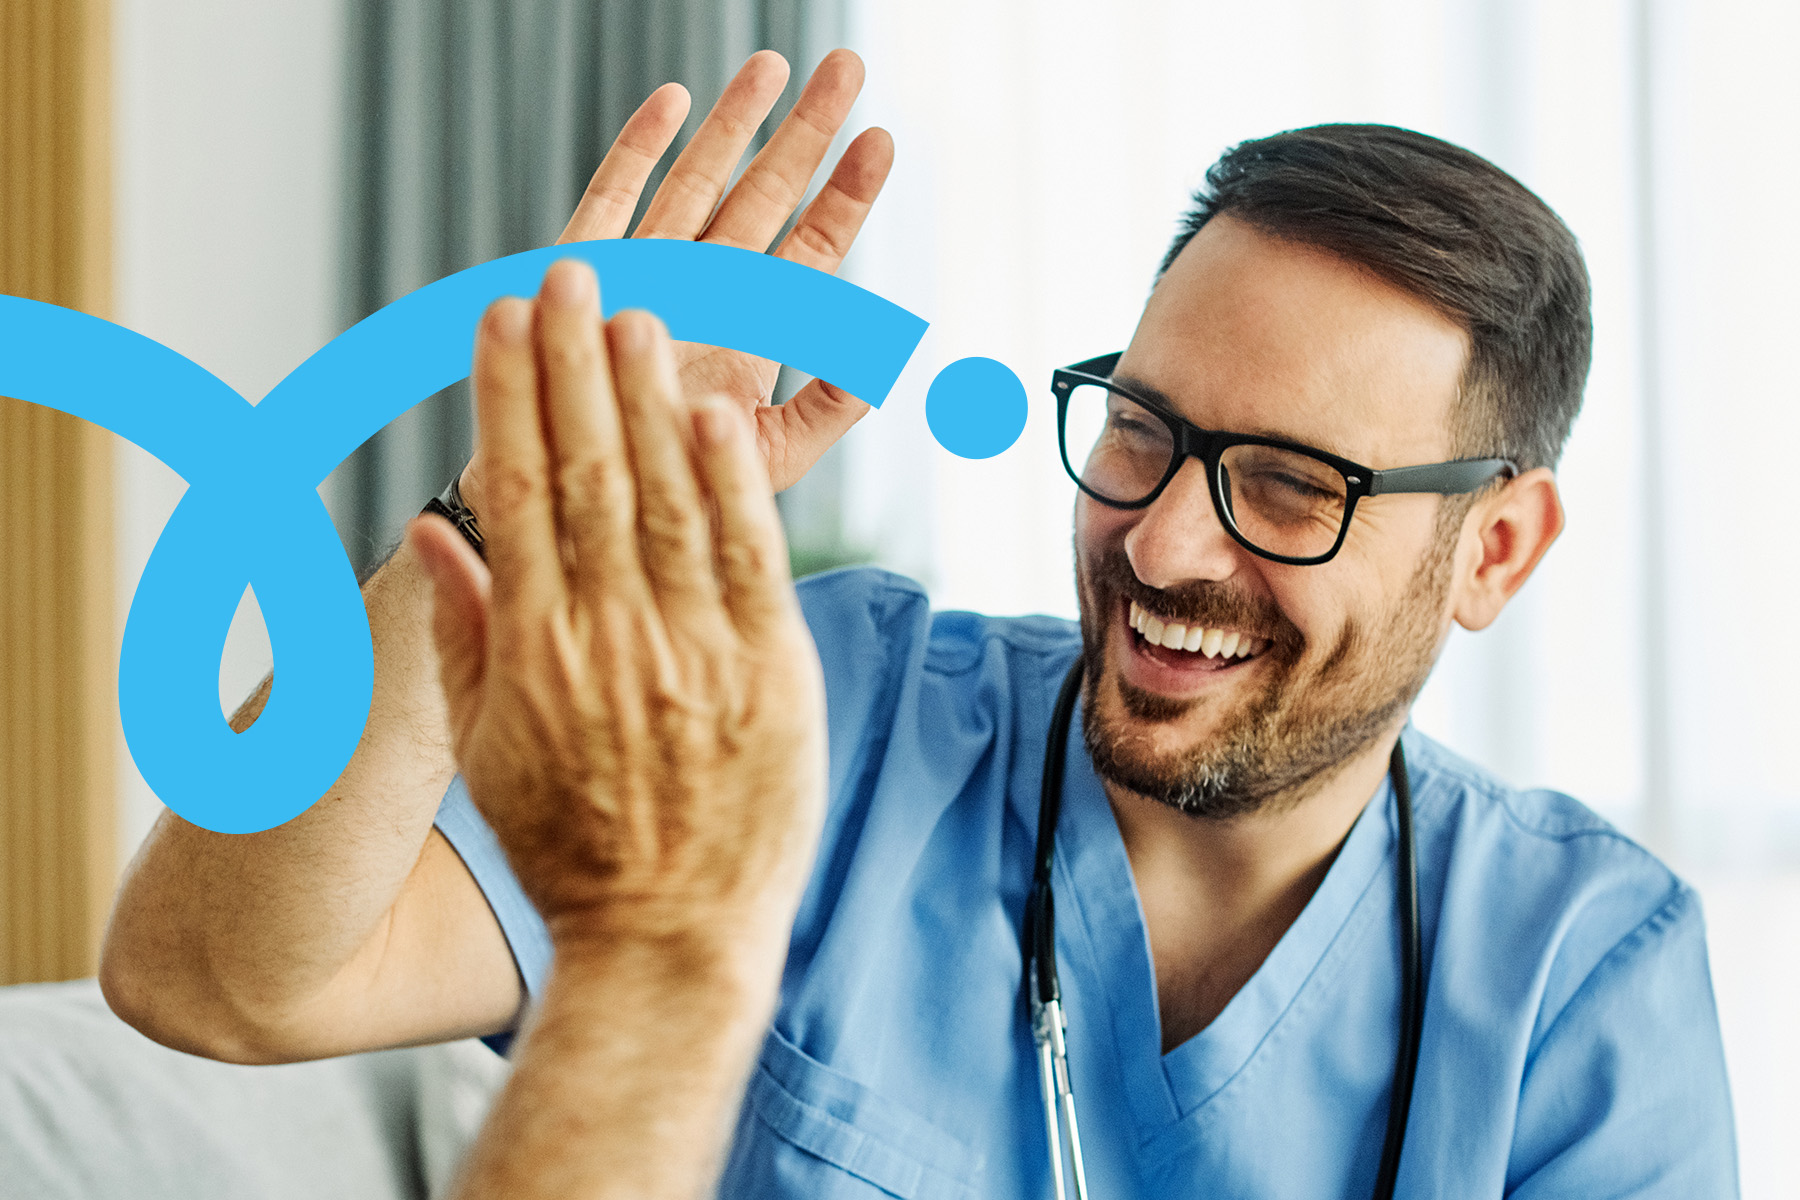 Healthcare professional high fiving a patient, smiling